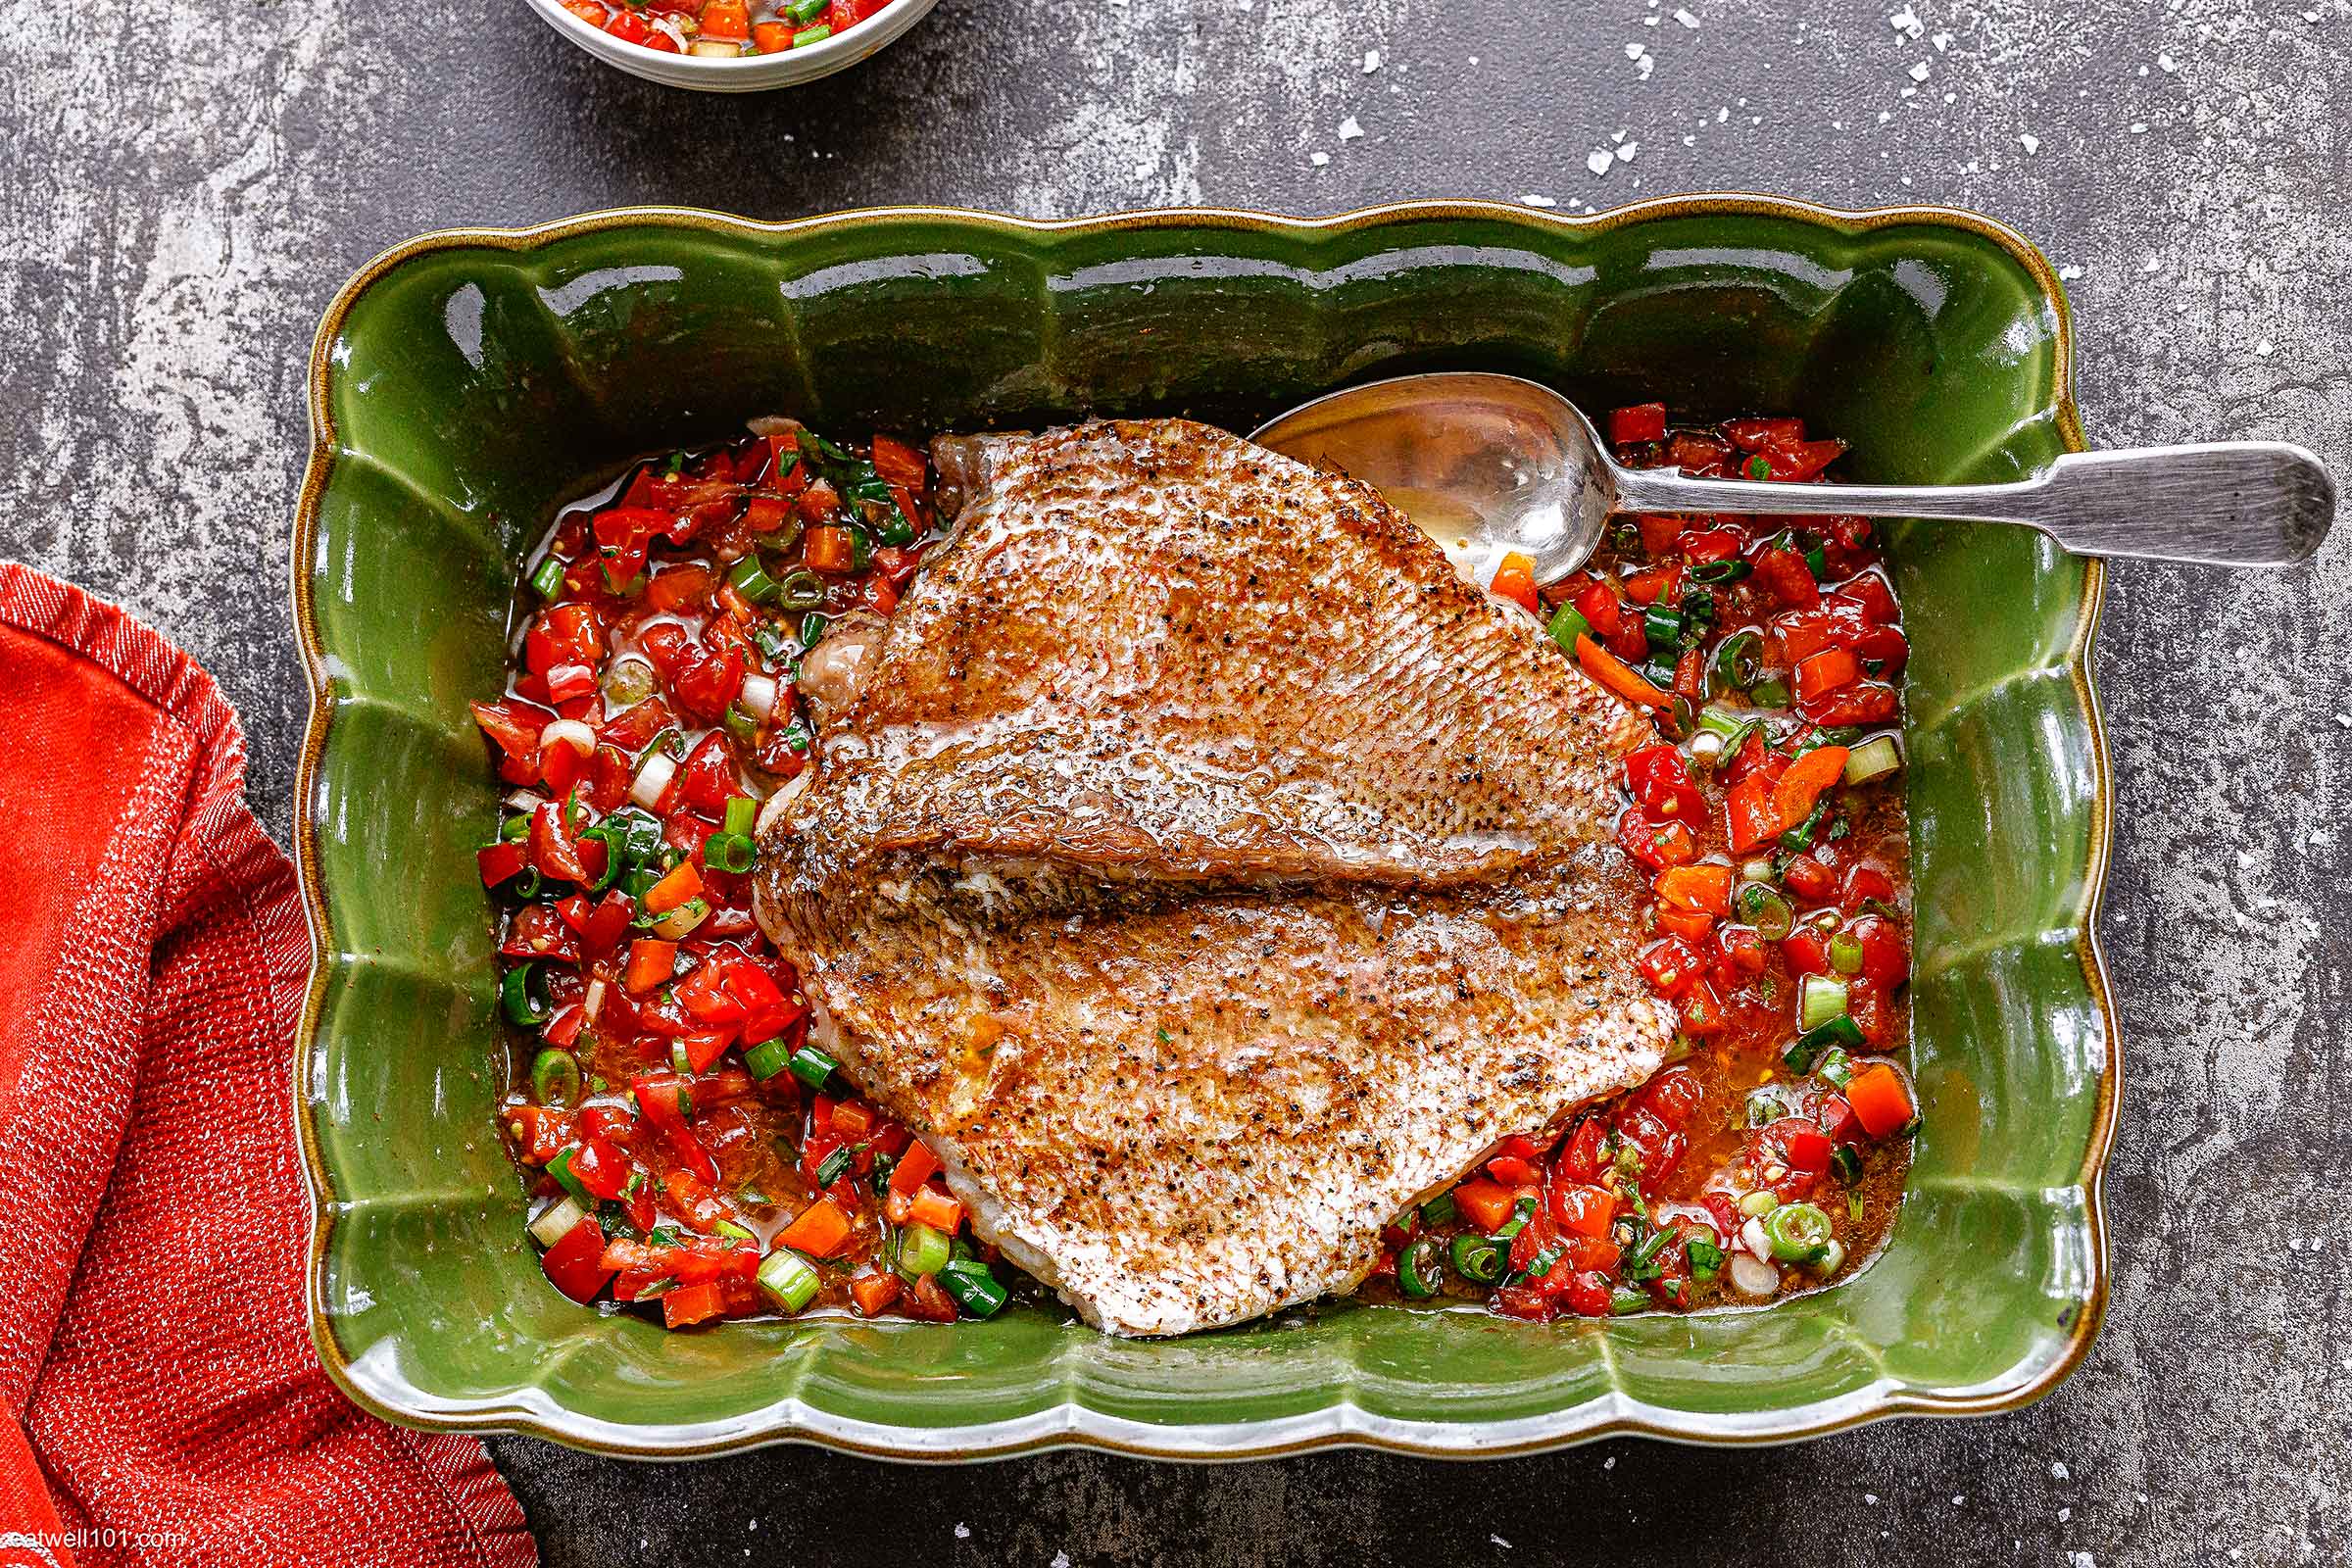 Baked Red Snapper with Salsa Fresca